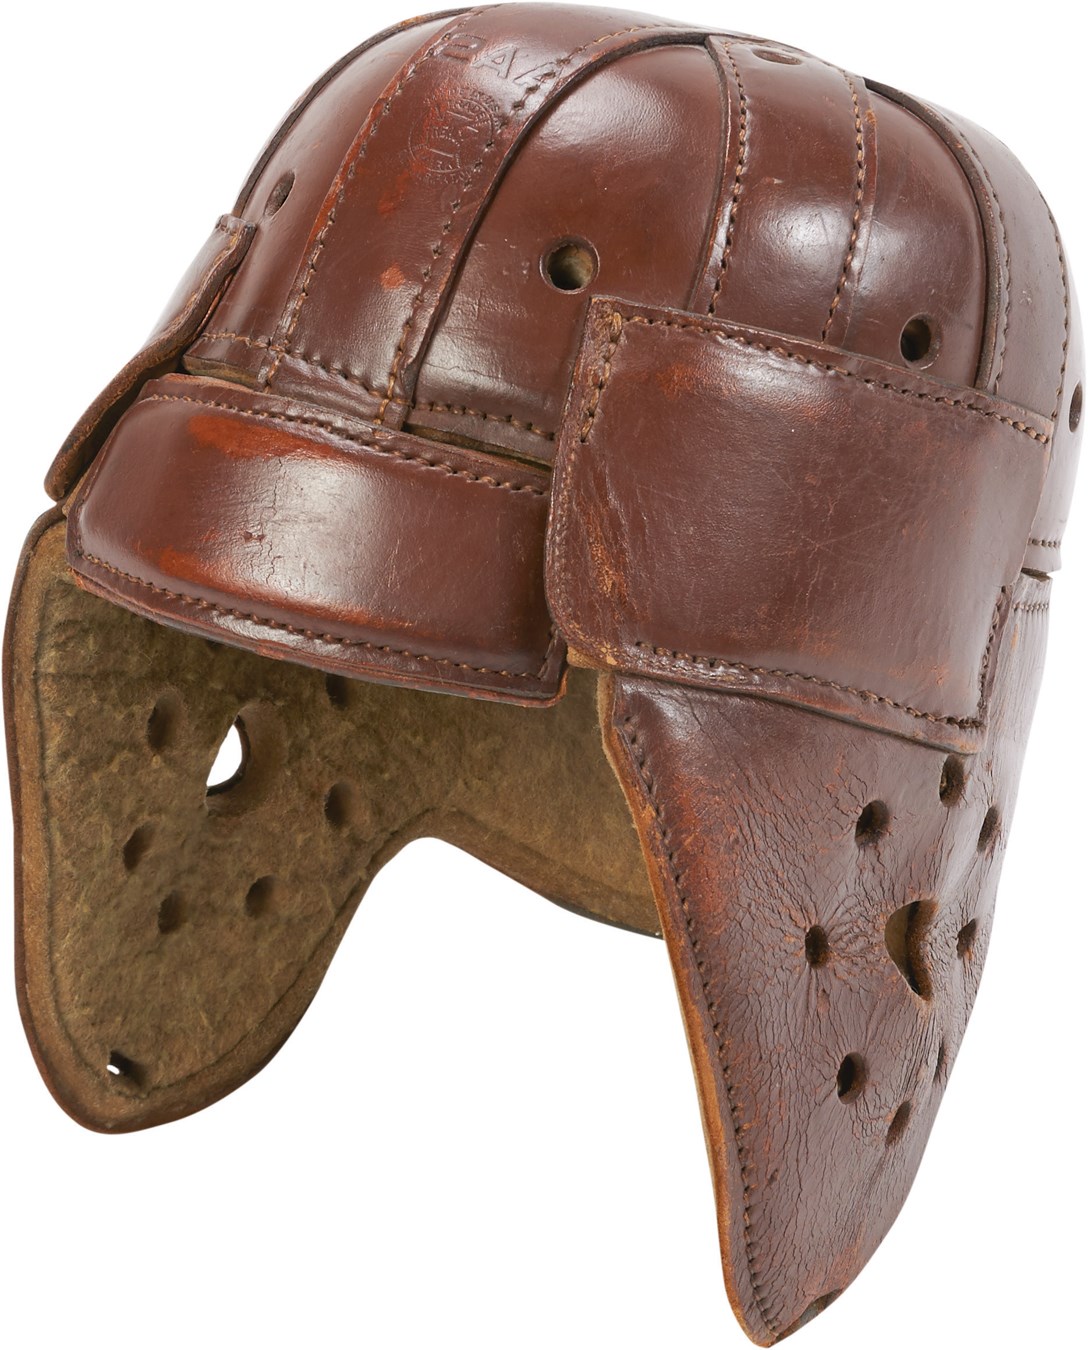 - 1930s Reach Football Helmet with Added Temple Protection